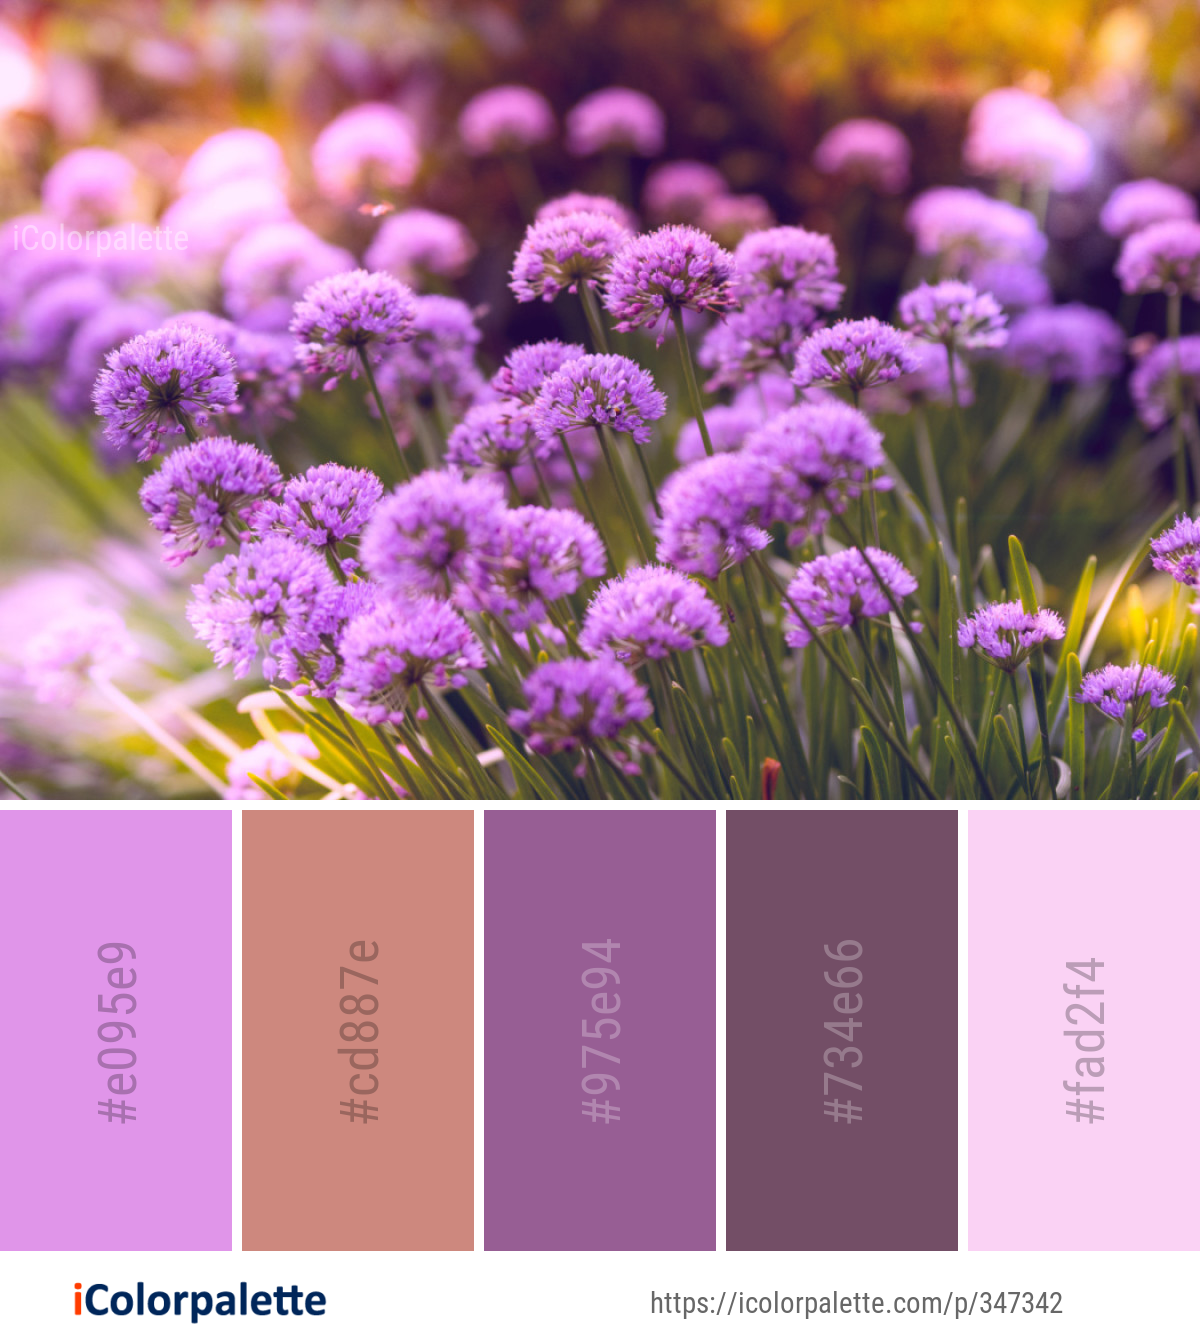 Color Palette Ideas from Flower Purple Pink Image